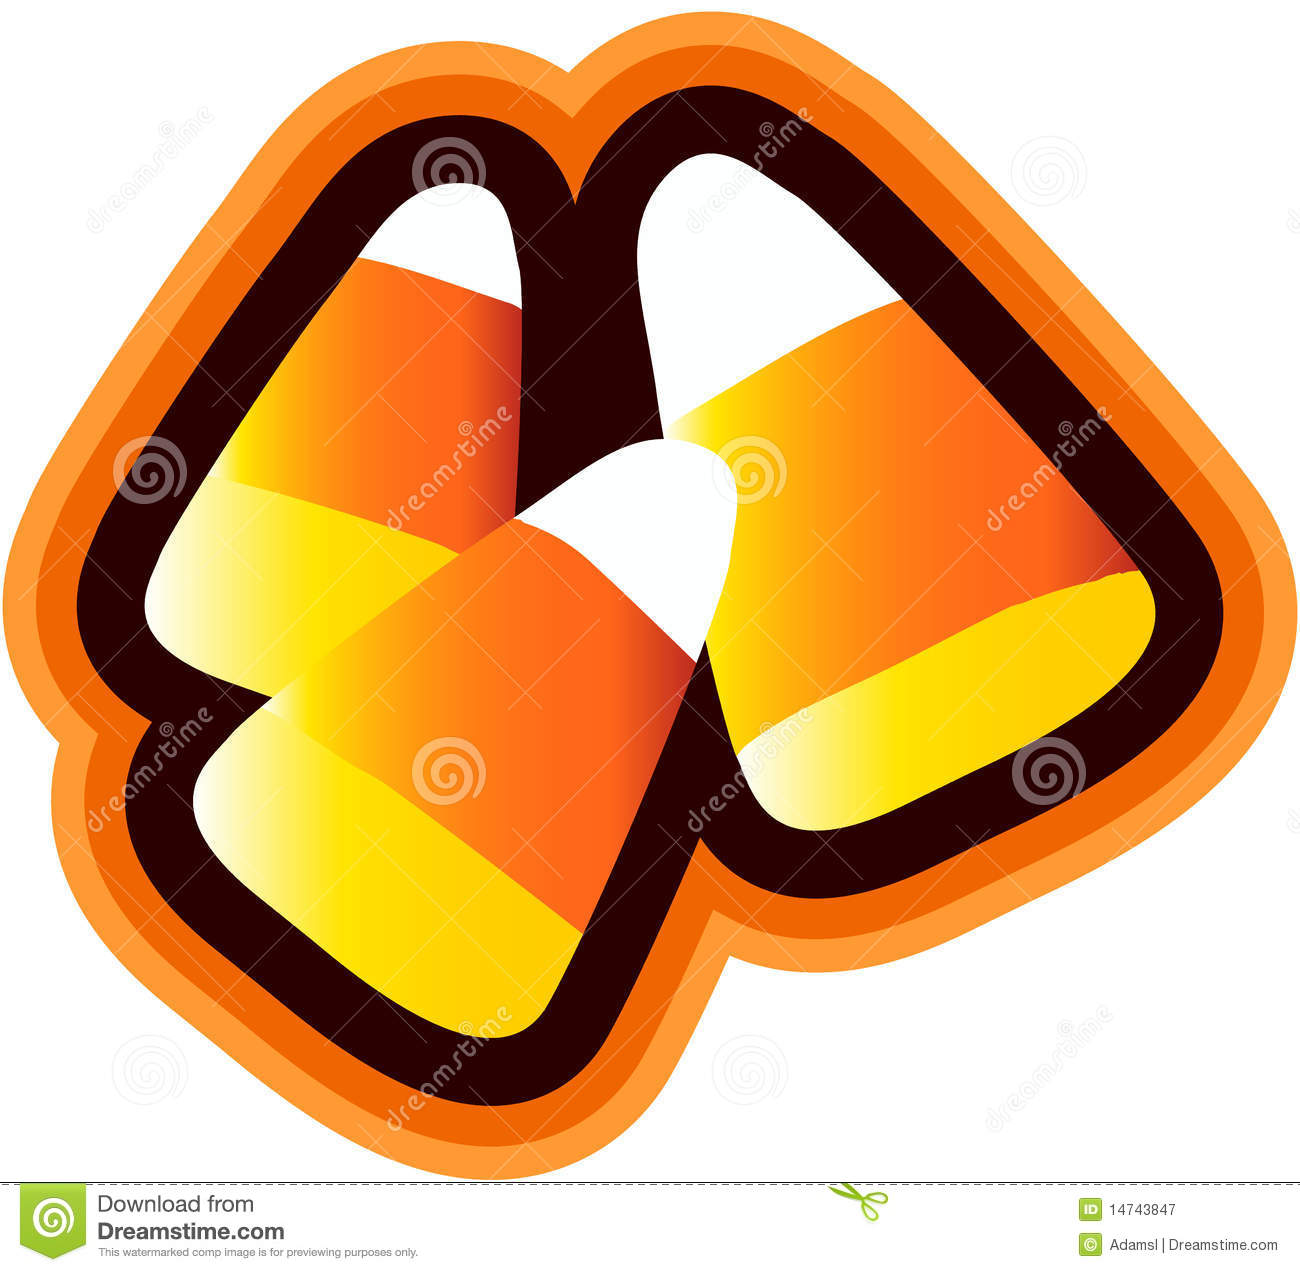 Candy Corn Clipart Isolated With Orange Shaded Outlines